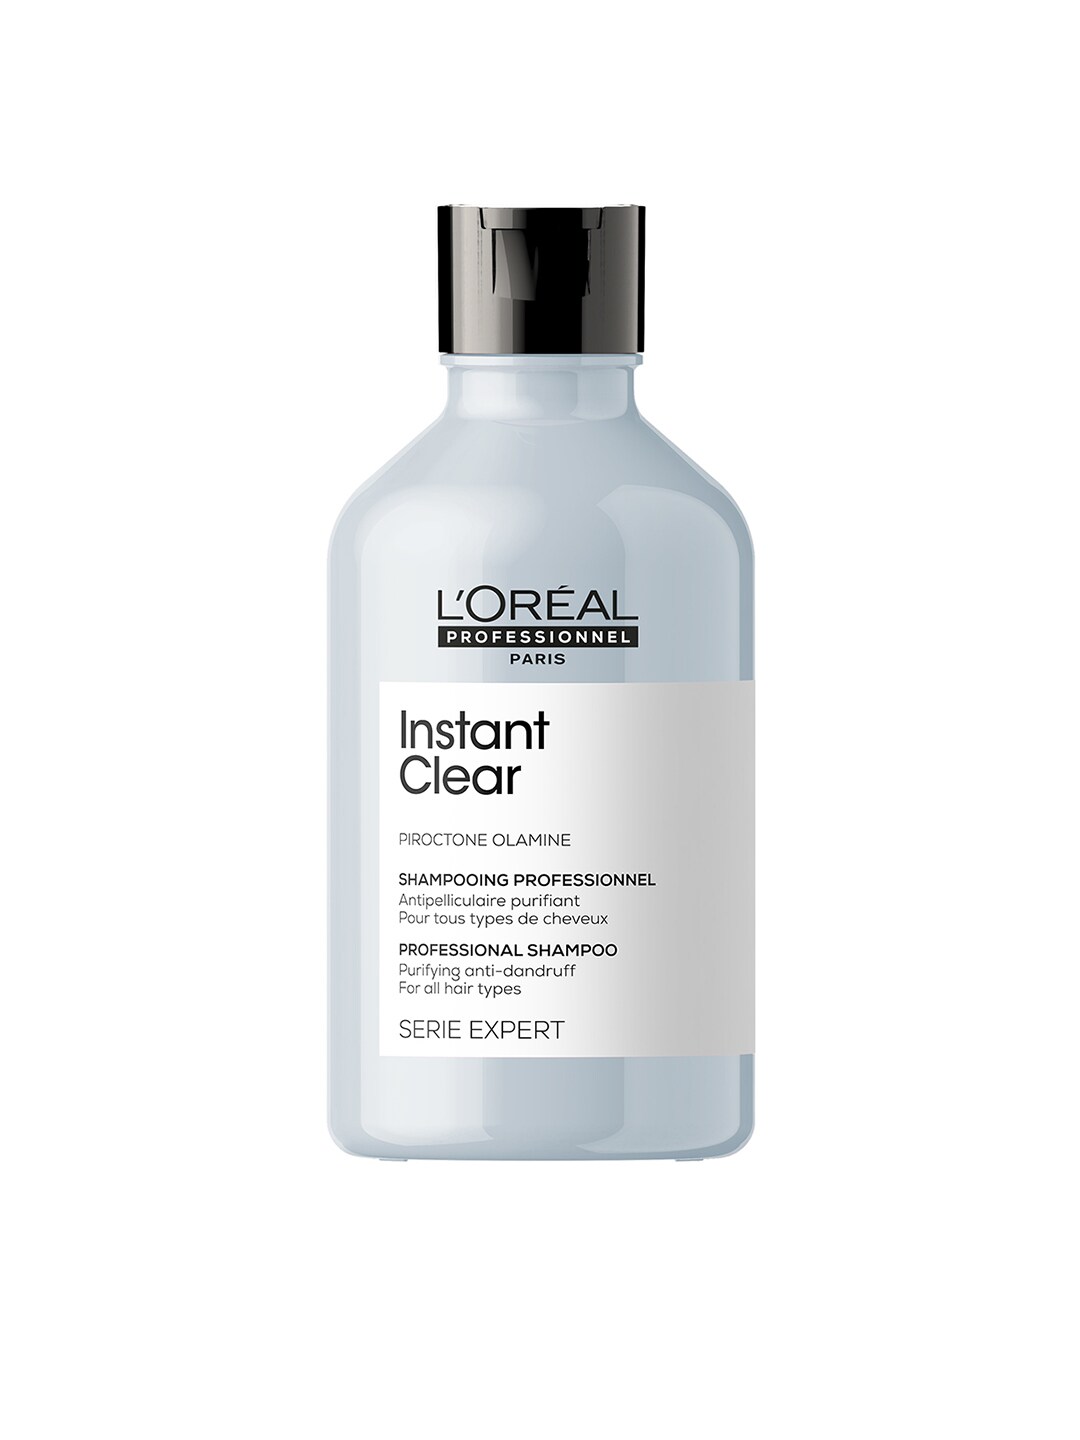 LOreal Professionnel Serie Expert Instant Clear Shampoo - 300 ml Price in India